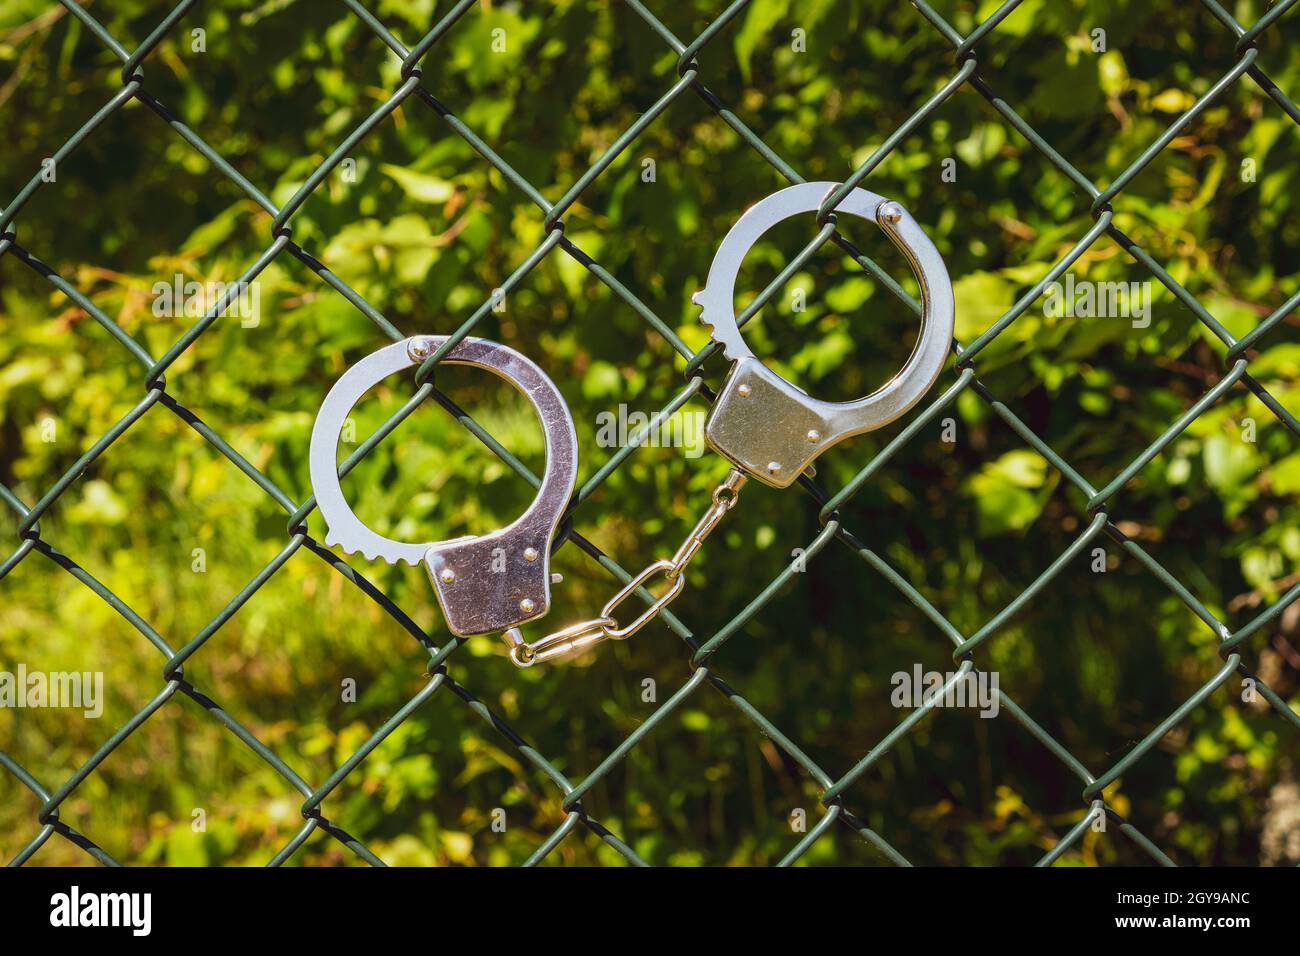 Handcuffs hanging on the metal fence with nature background Stock Photo